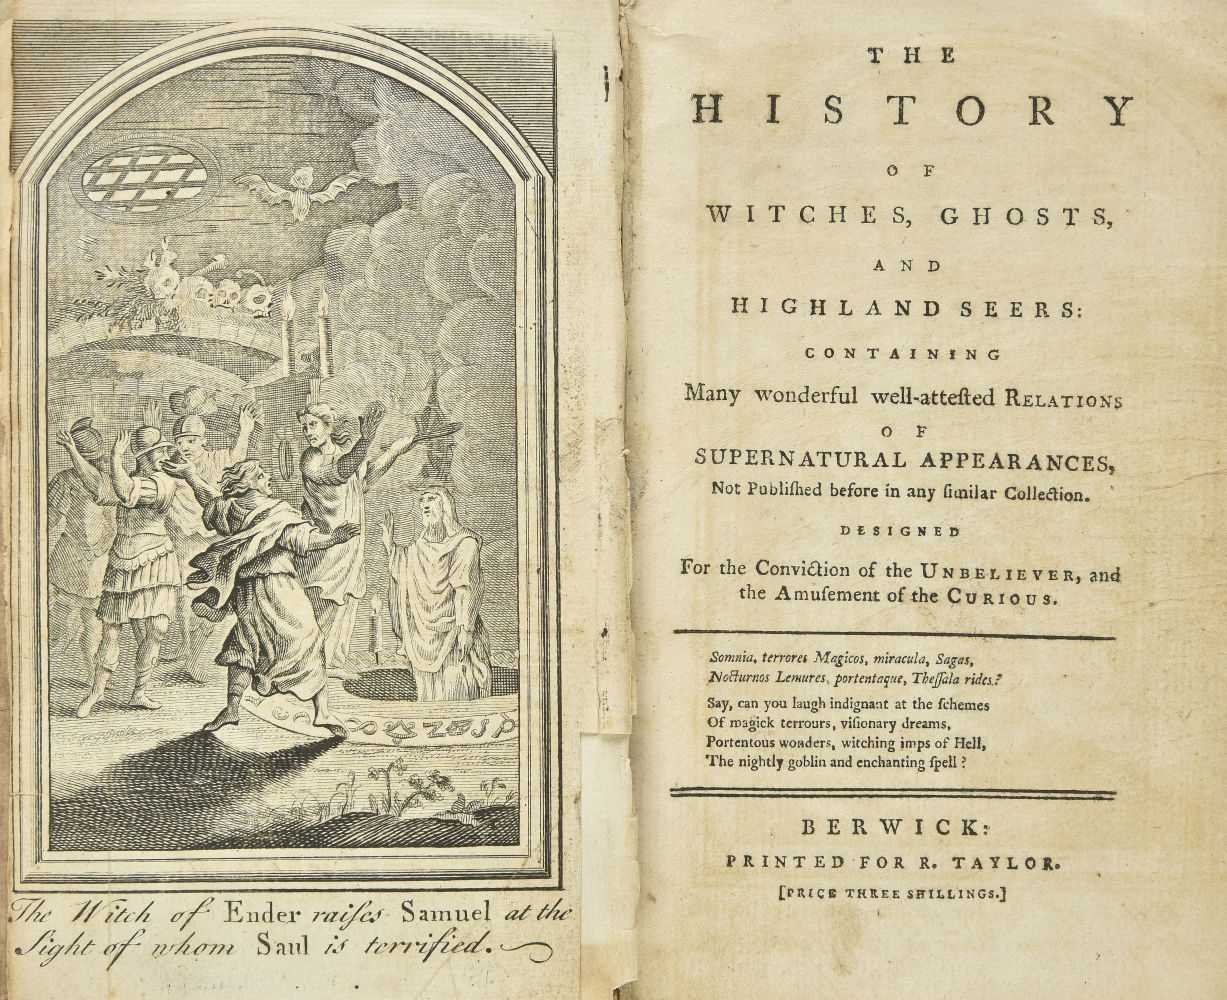 Lot 383 - Witchcraft. The History of Witches, Ghosts, and Highland Seers... , 1st edition, Berwick, [1772?]